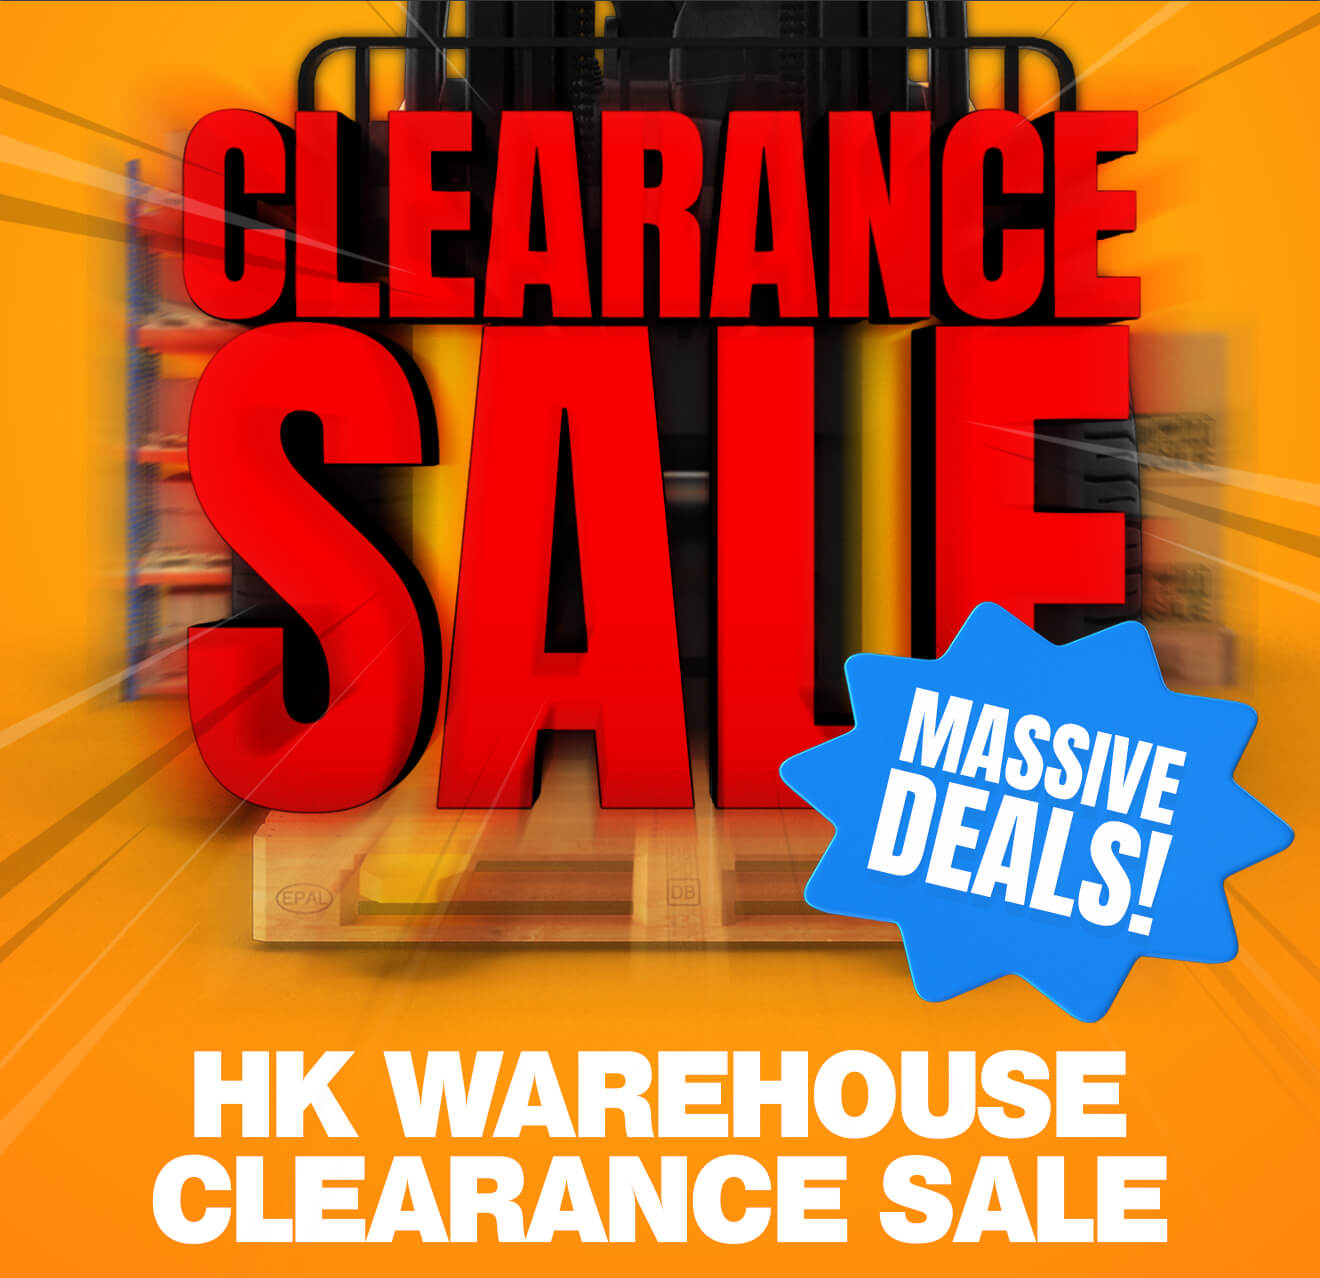 US Warehouse Moving Sale